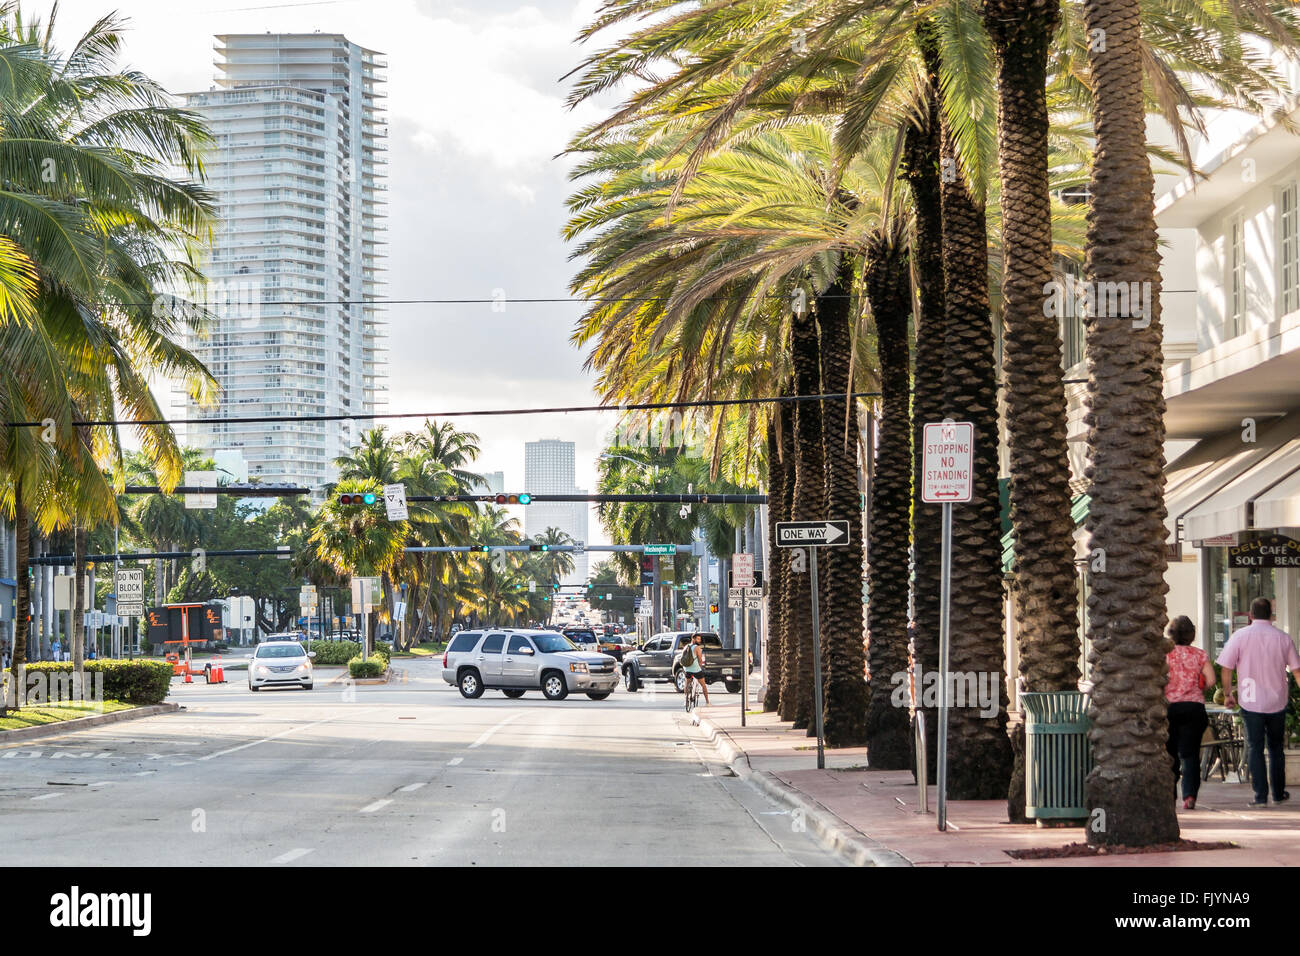 View of 5th Street from Ocean Drive in South Beach district of Miami Beach, Florida, USA Stock Photo